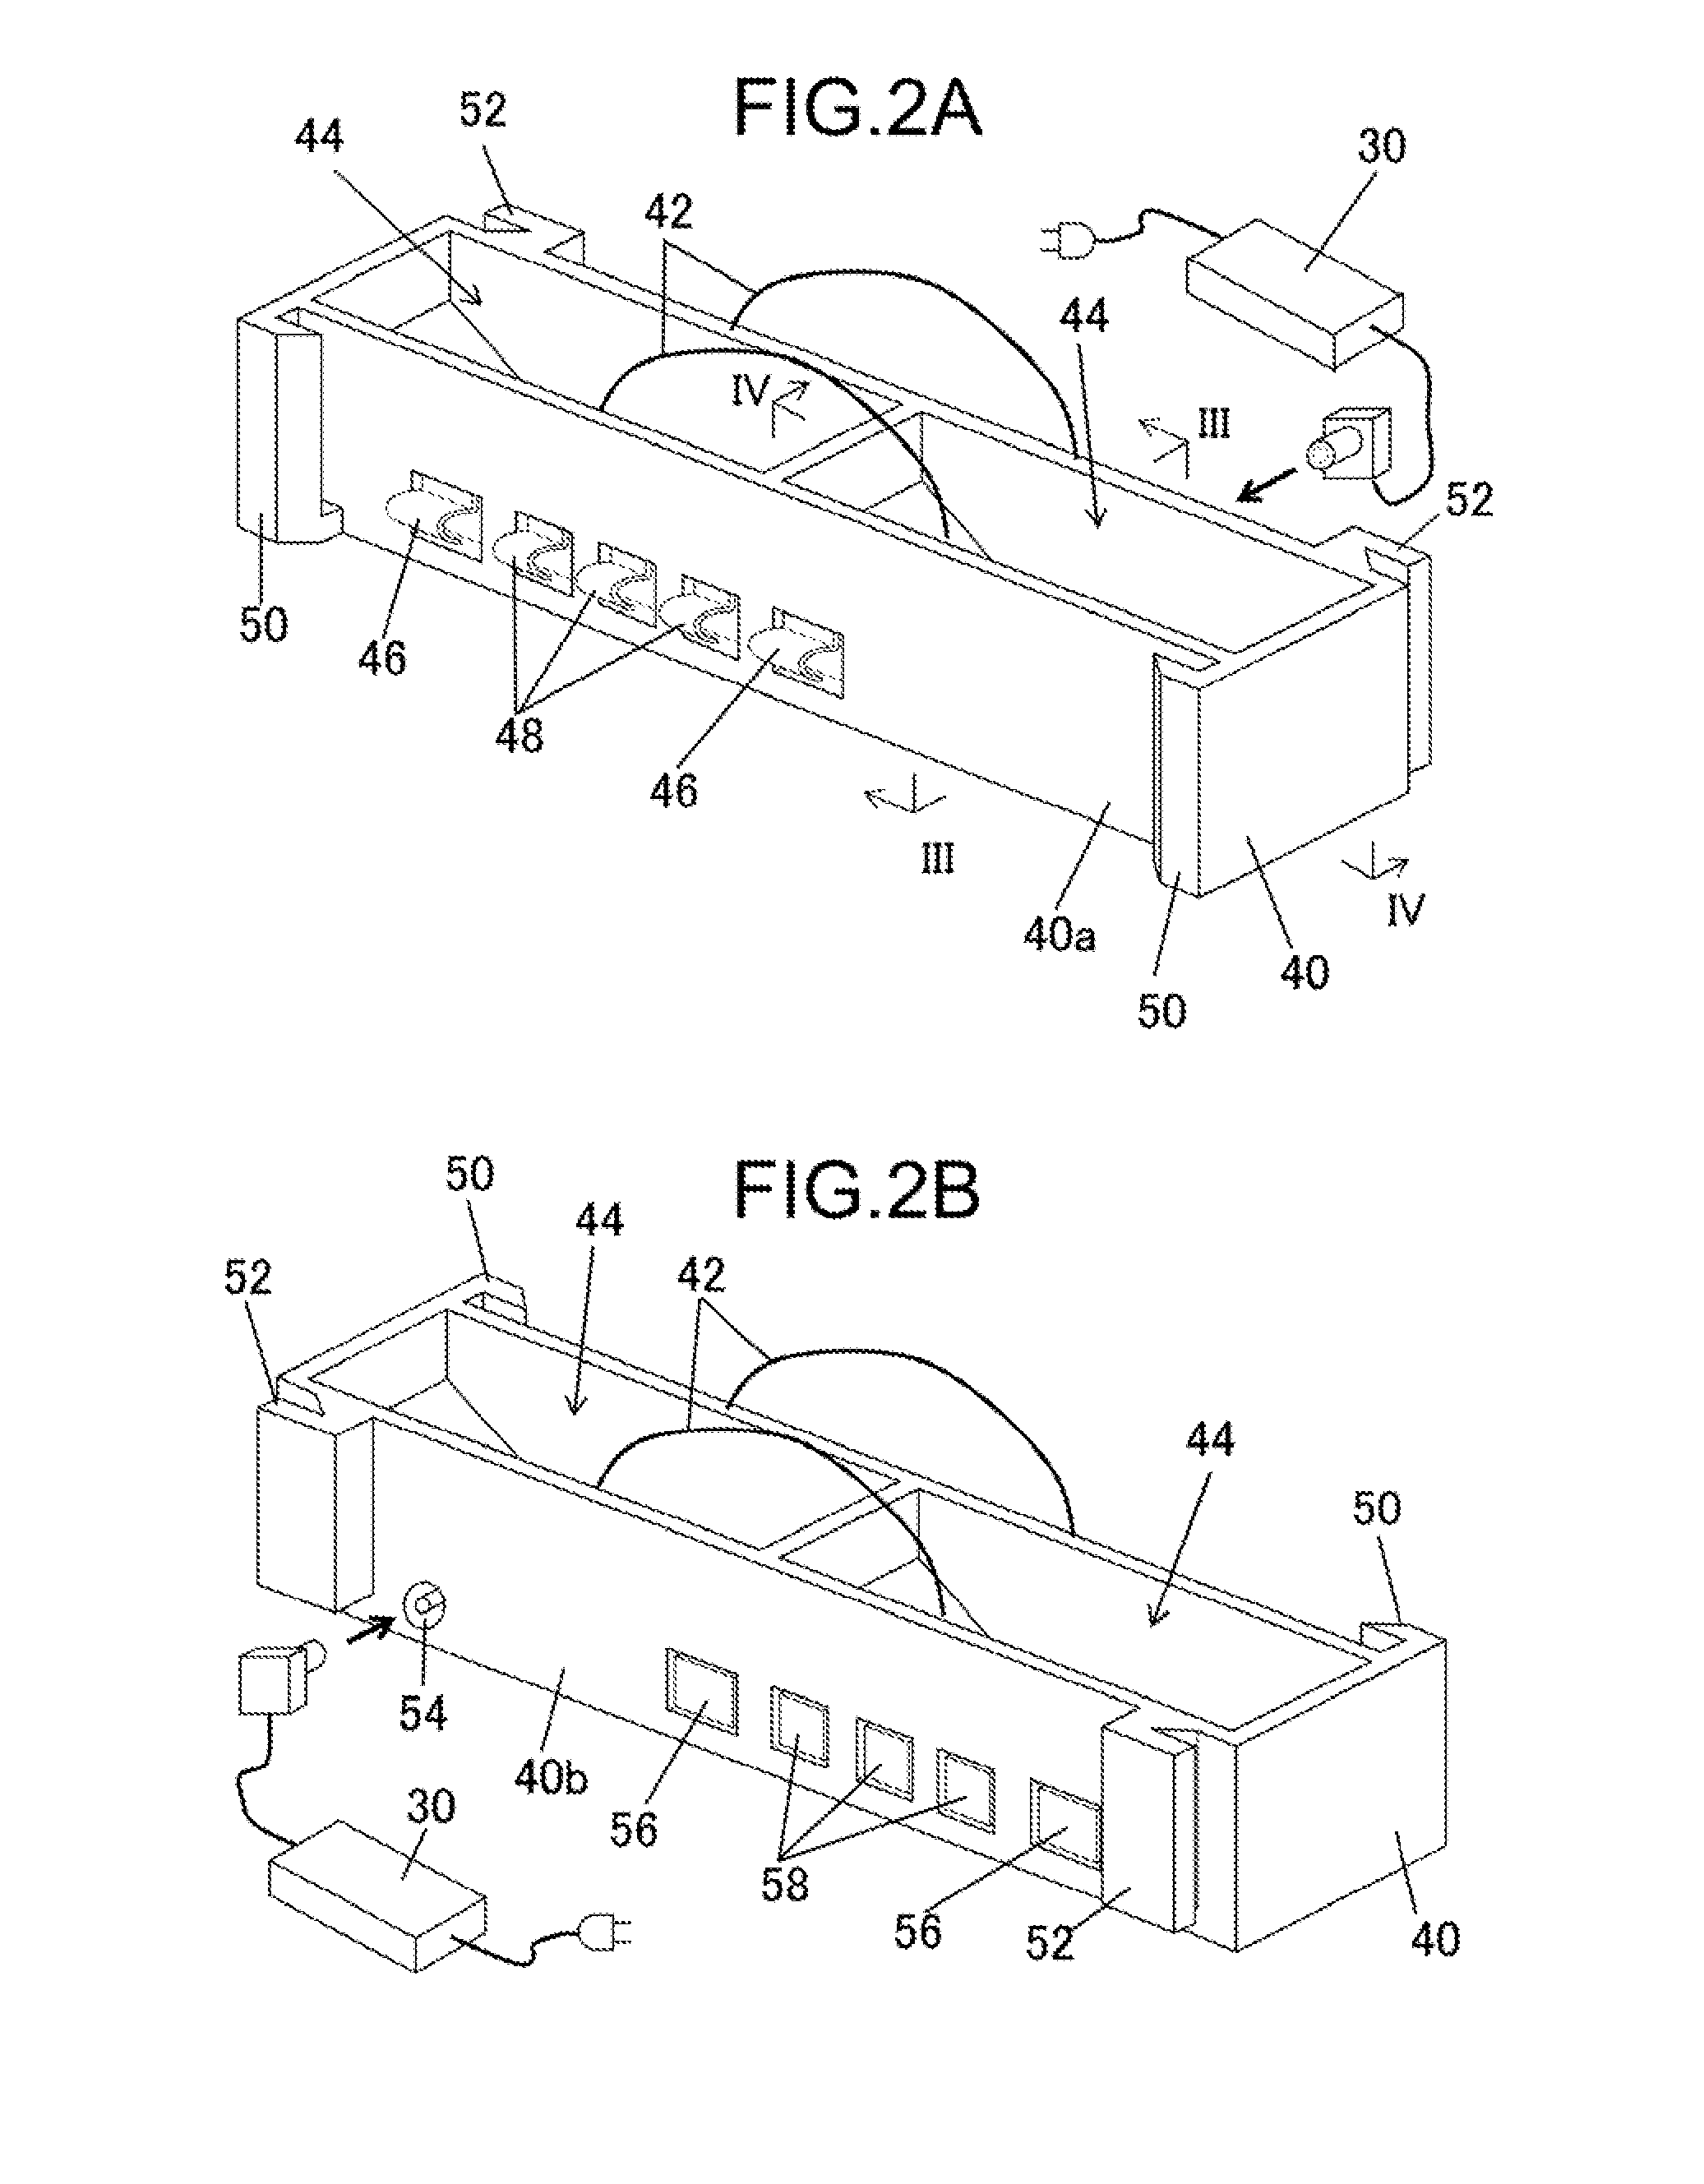 Charger, Battery Pack Charging System and Cordless Power Tool System